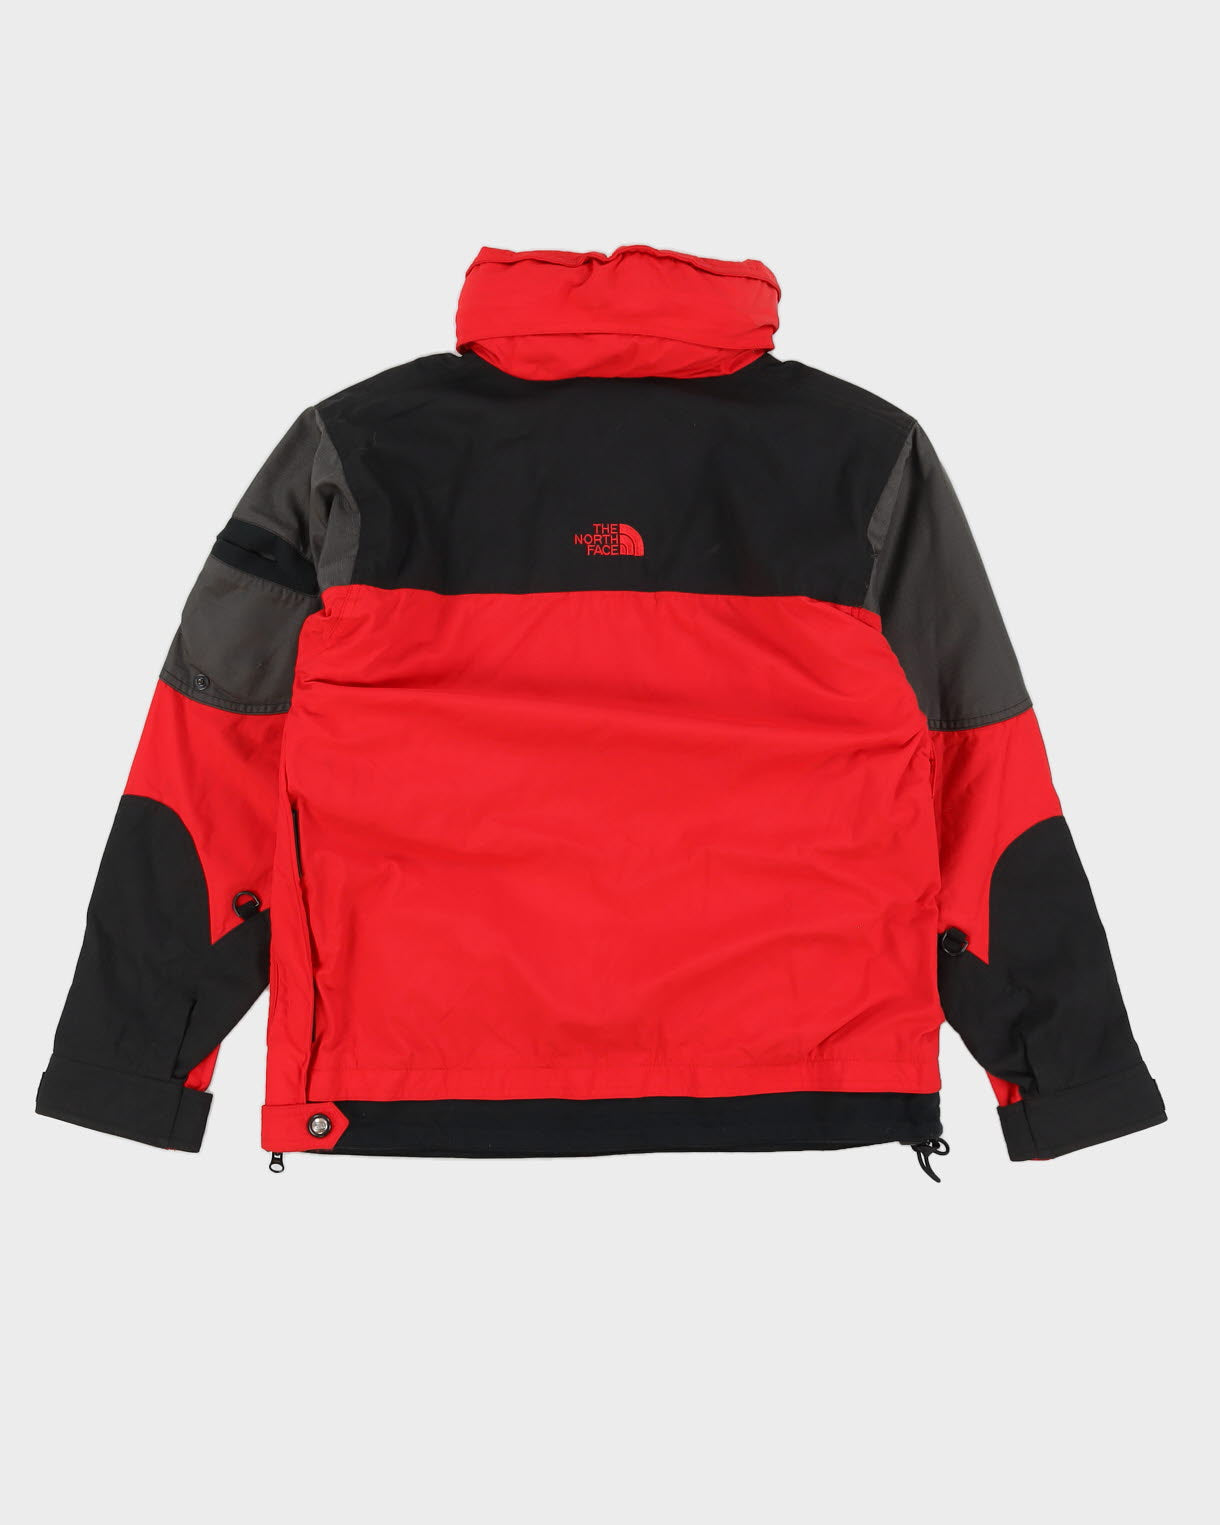 00s The North Face Extreme Ski Red Jacket Extreme Gear - S